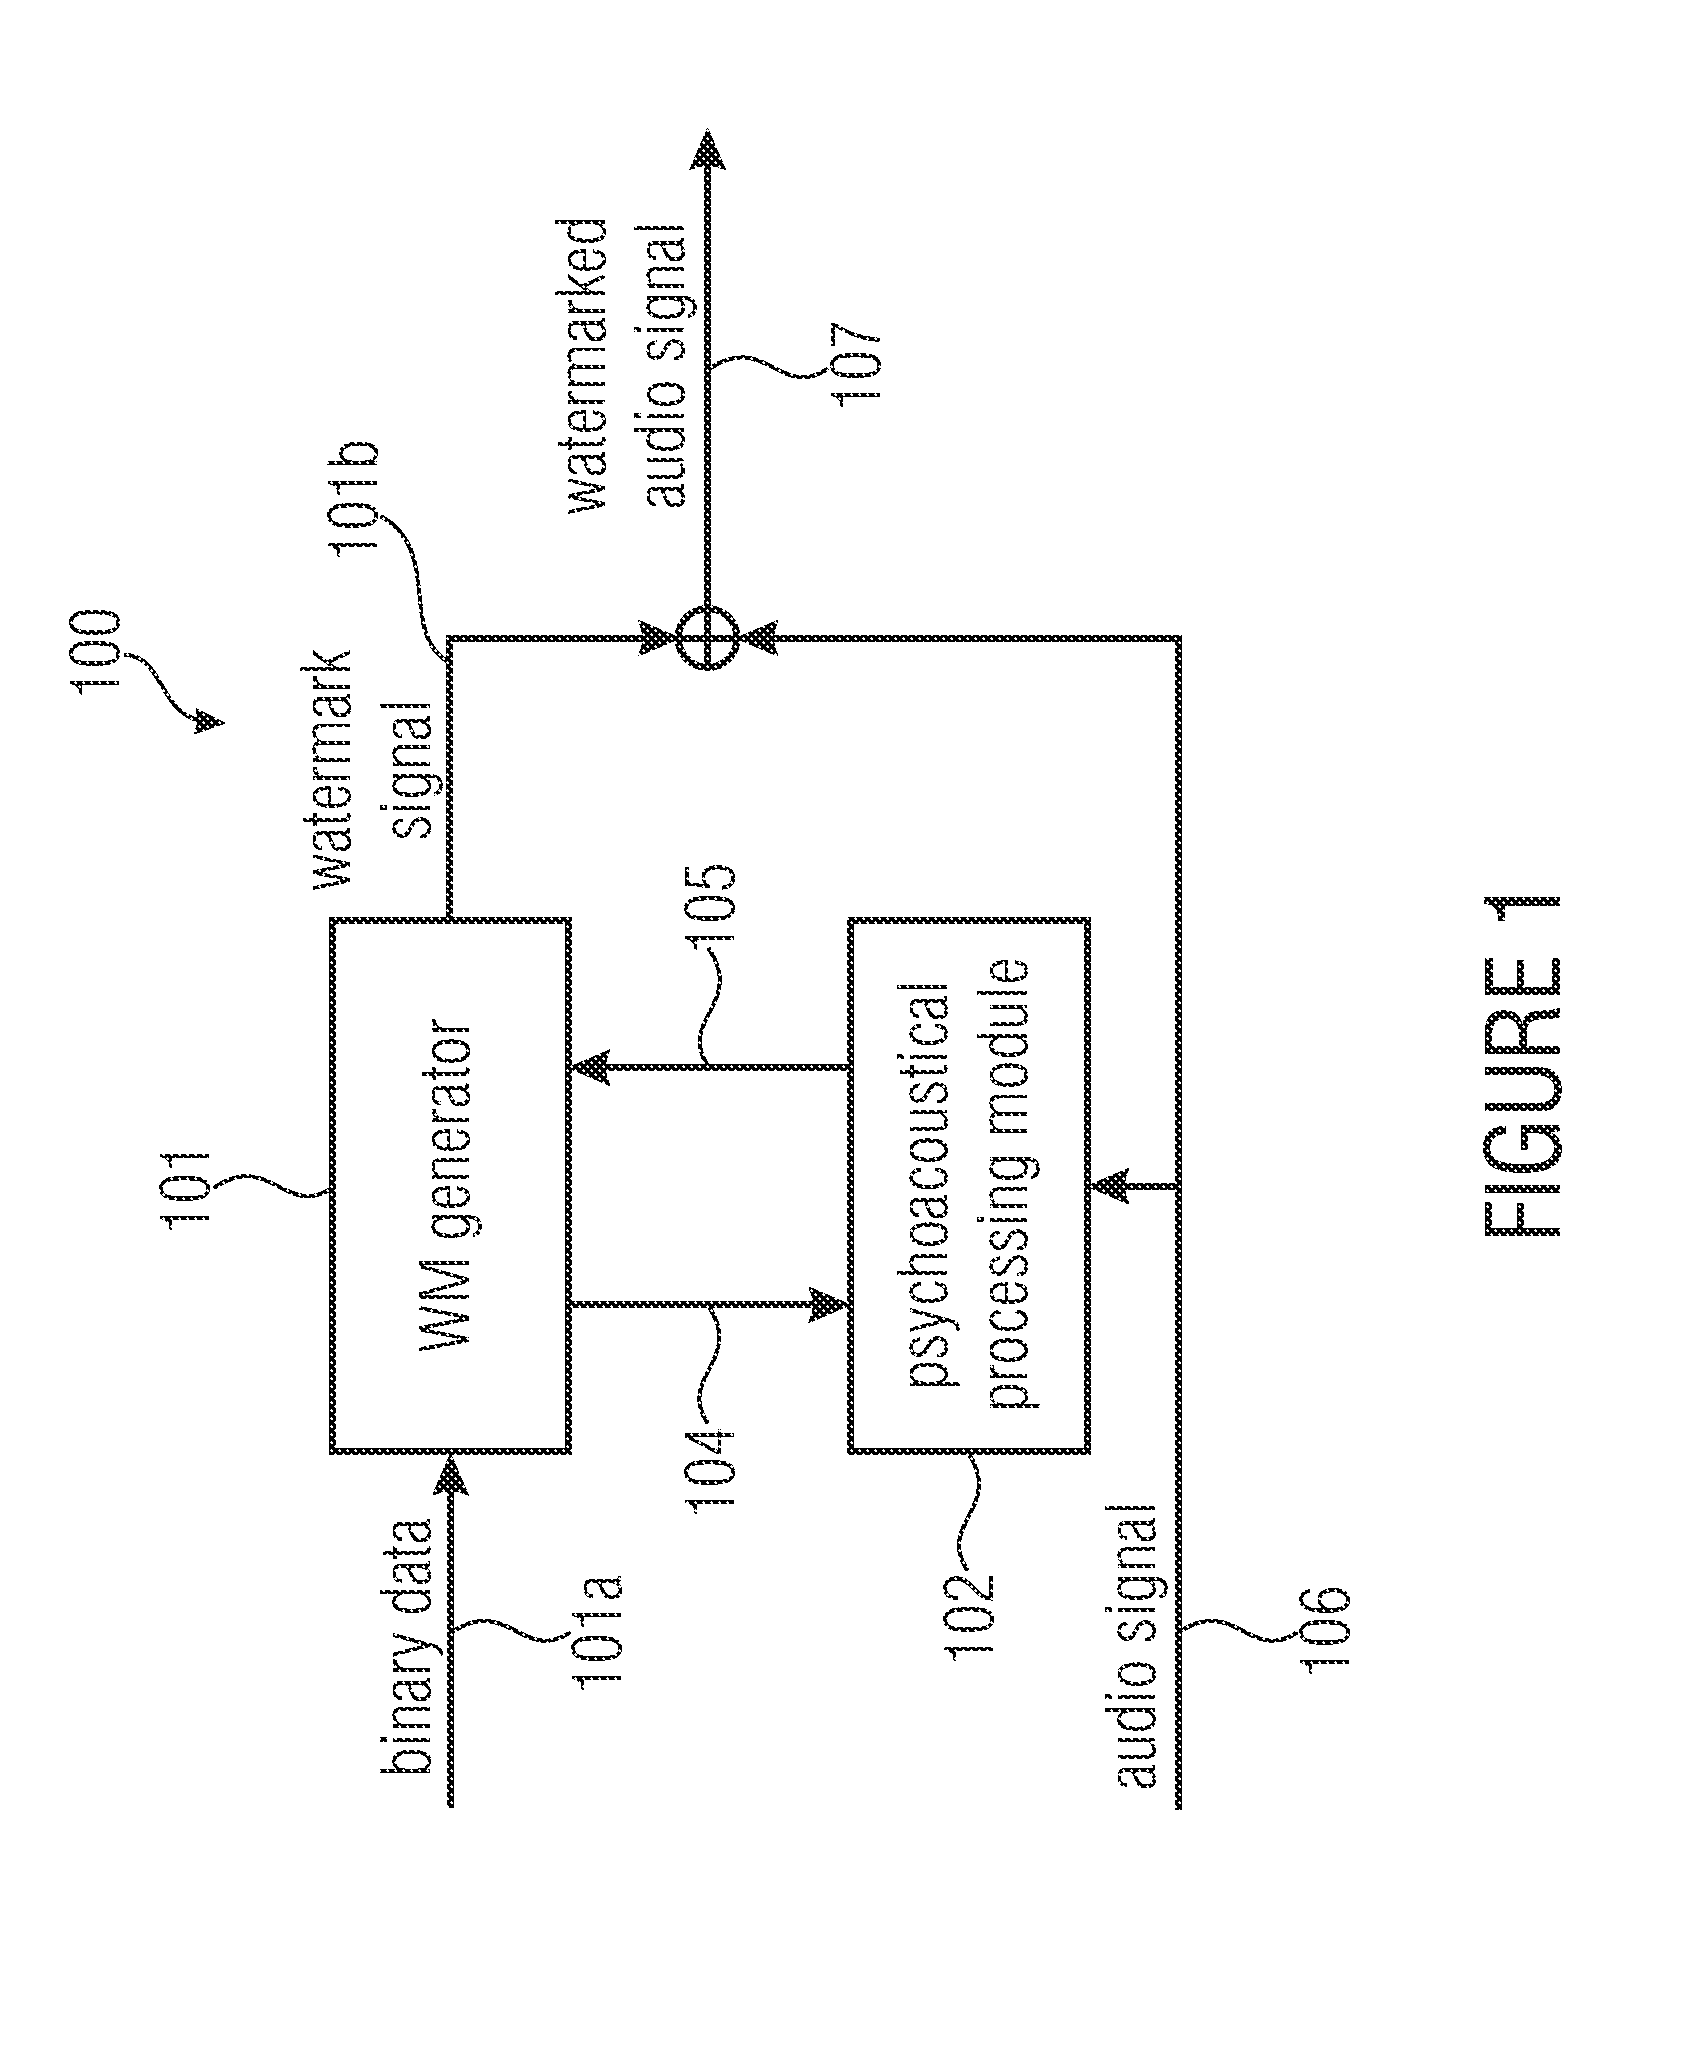 Watermark generator, watermark decoder, method for providing a watermark signal in dependence on binary message data, method for providing binary message data in dependence on a watermarked signal and computer program using a differential encoding